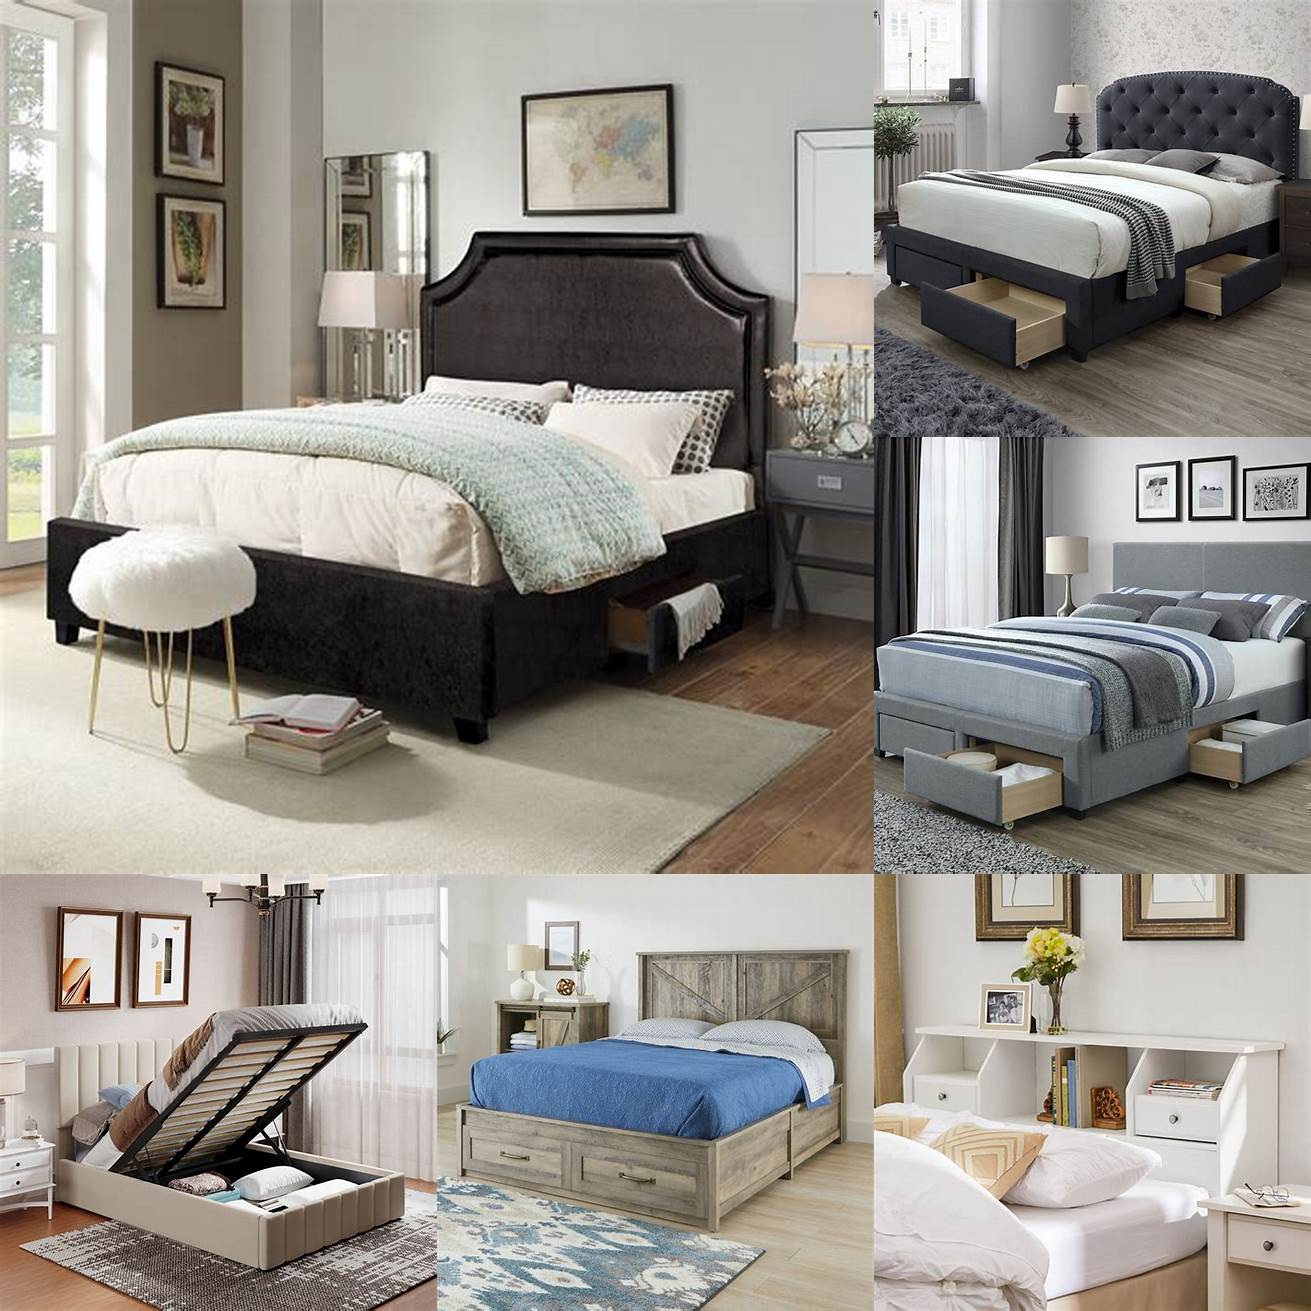 A bed frame with storage and a headboard